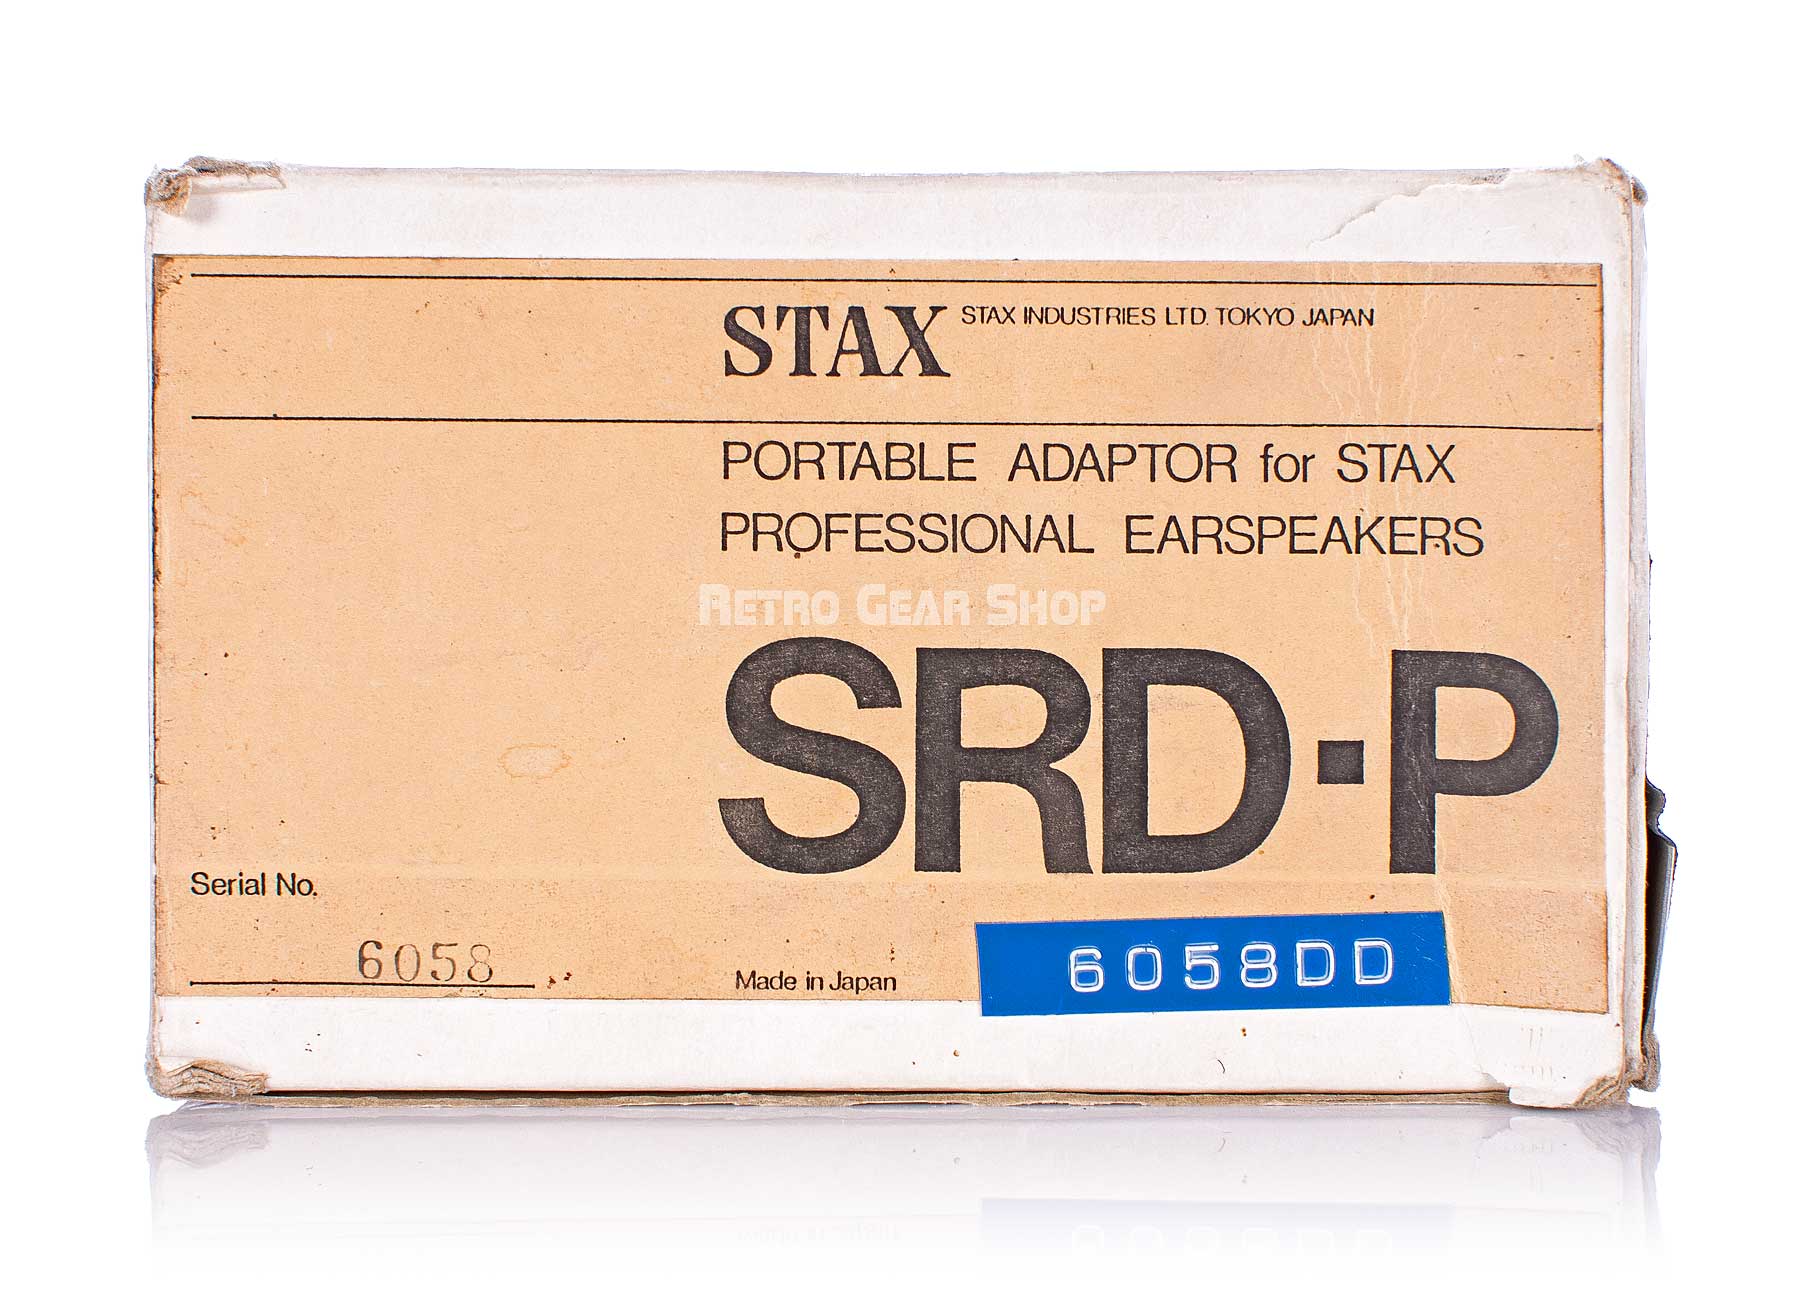 Stax SRD-P Portable Adaptor for Stax Professional Earspeakers Original Box